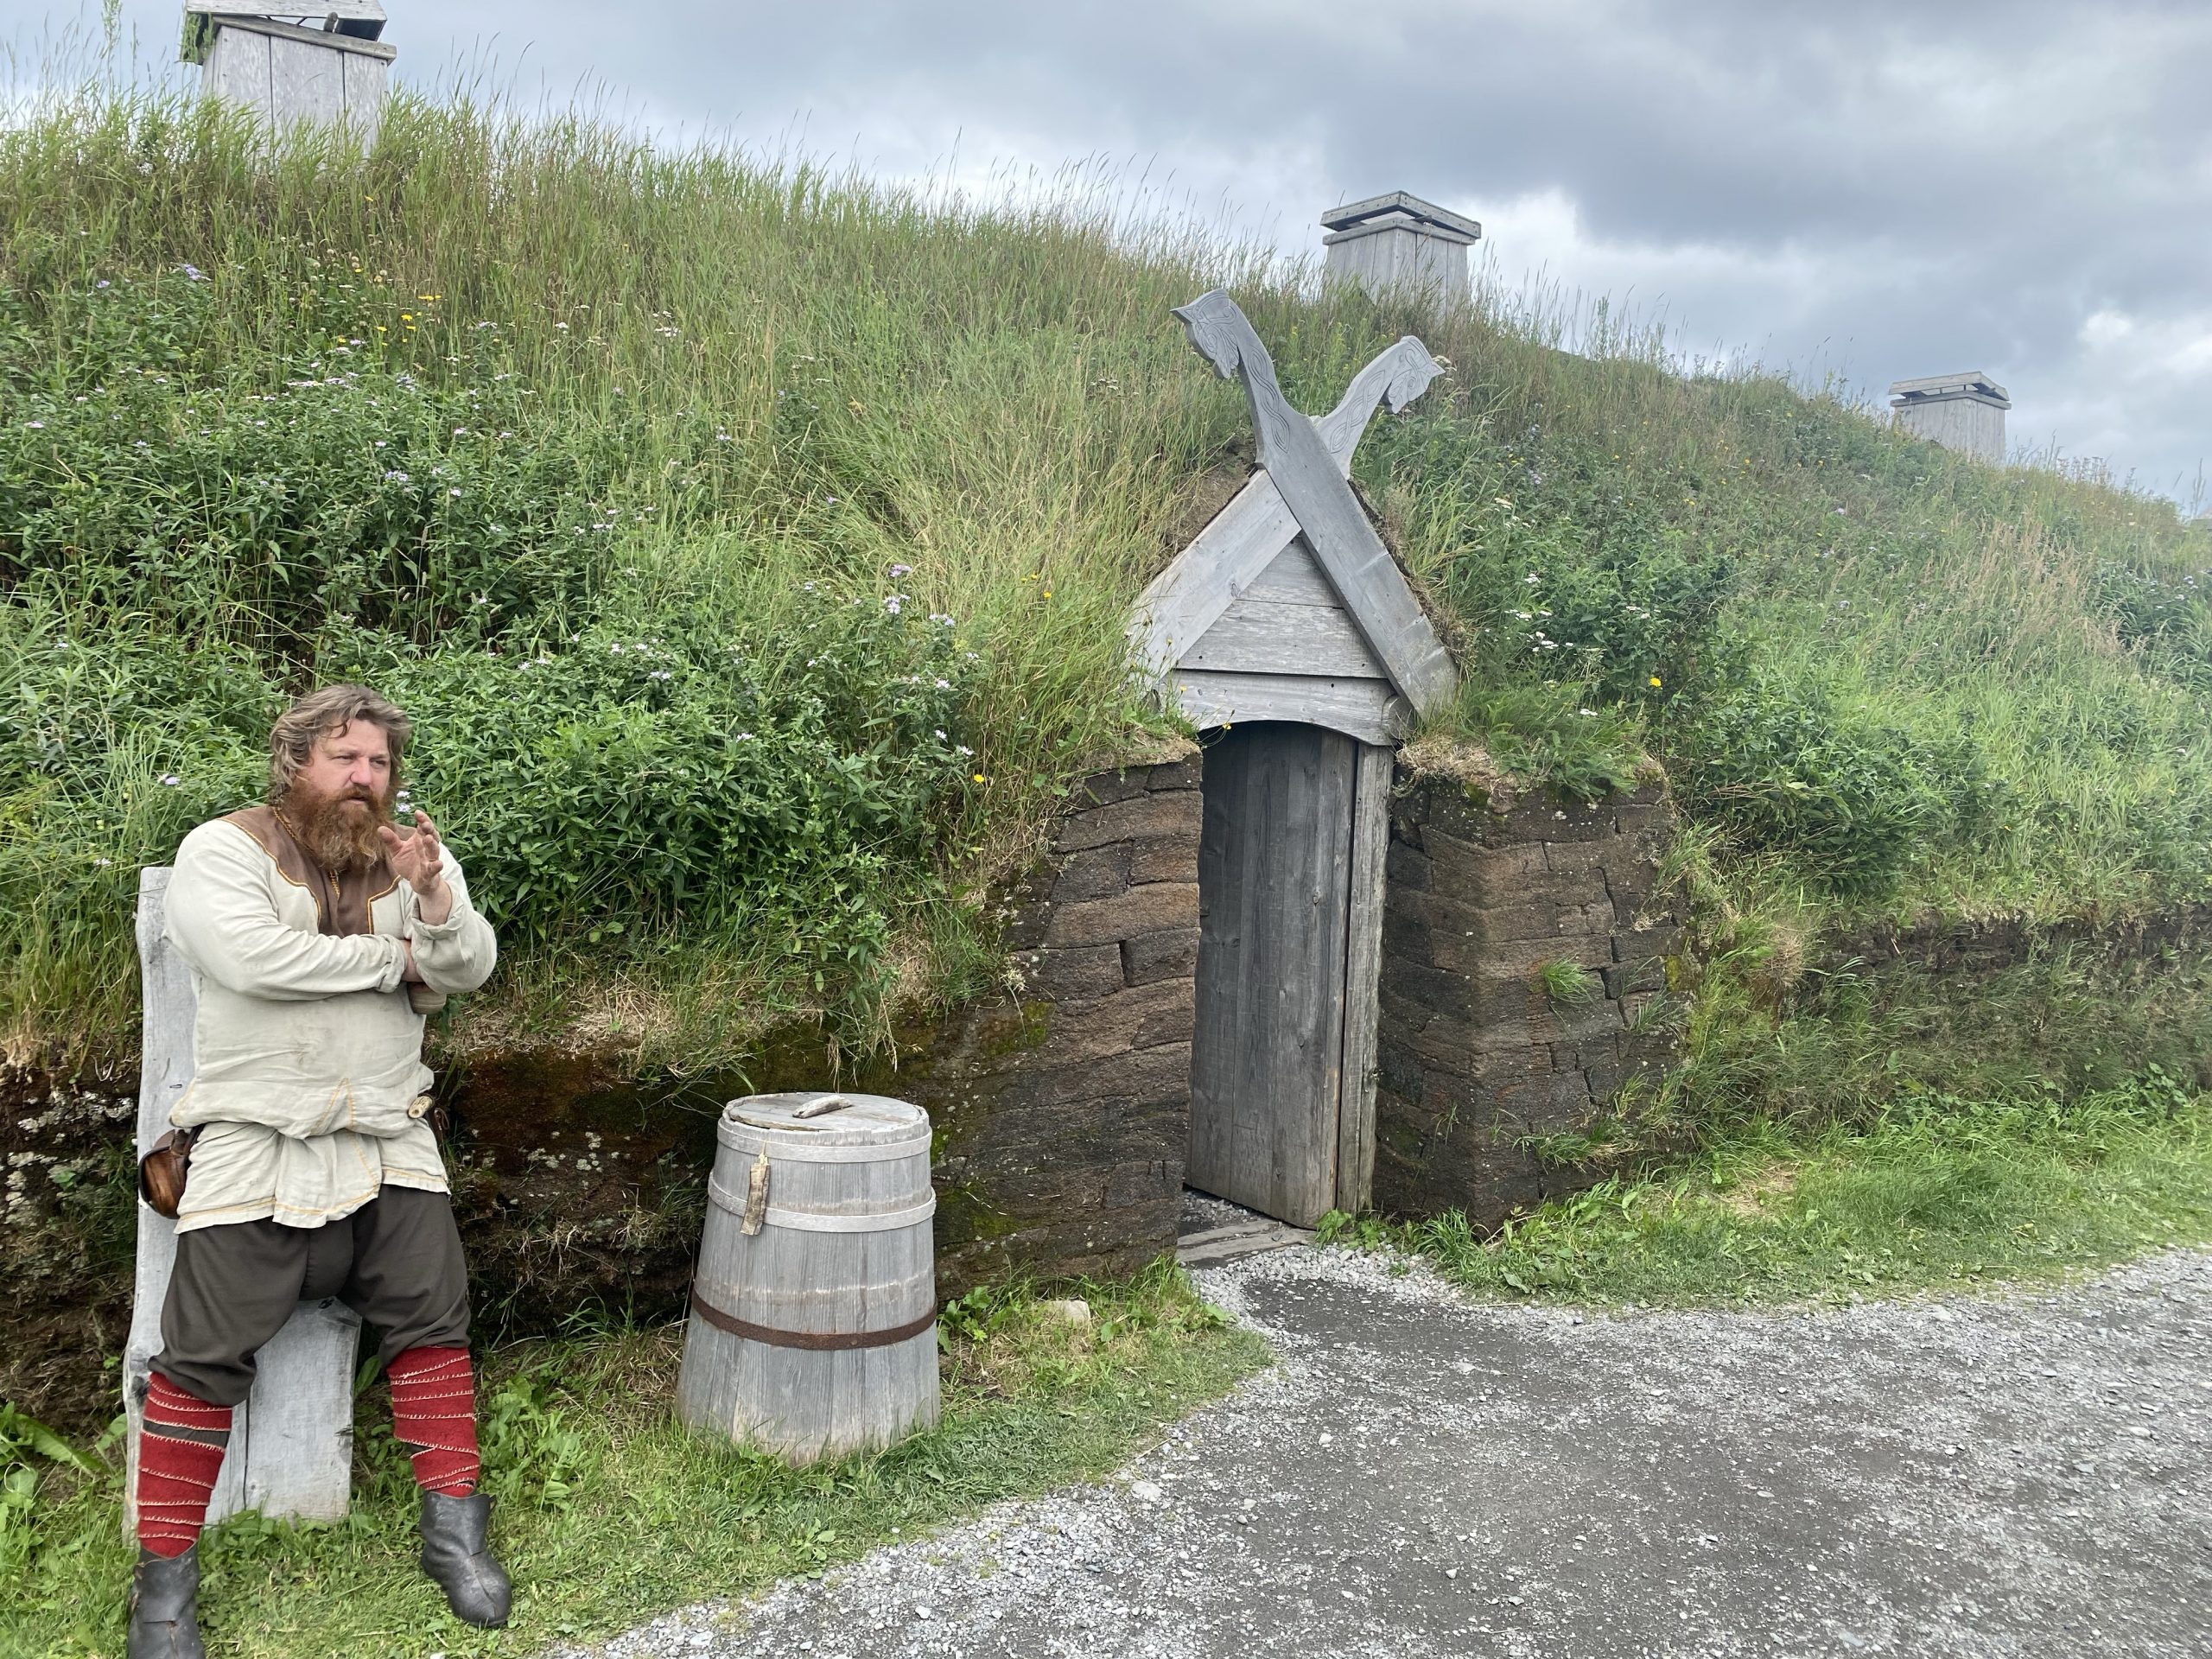 Ragnar (character name) talks to Chuck and I while standing outside an ornate (main) entryway into a re-creation of a 1,000 year old Norse sod house.